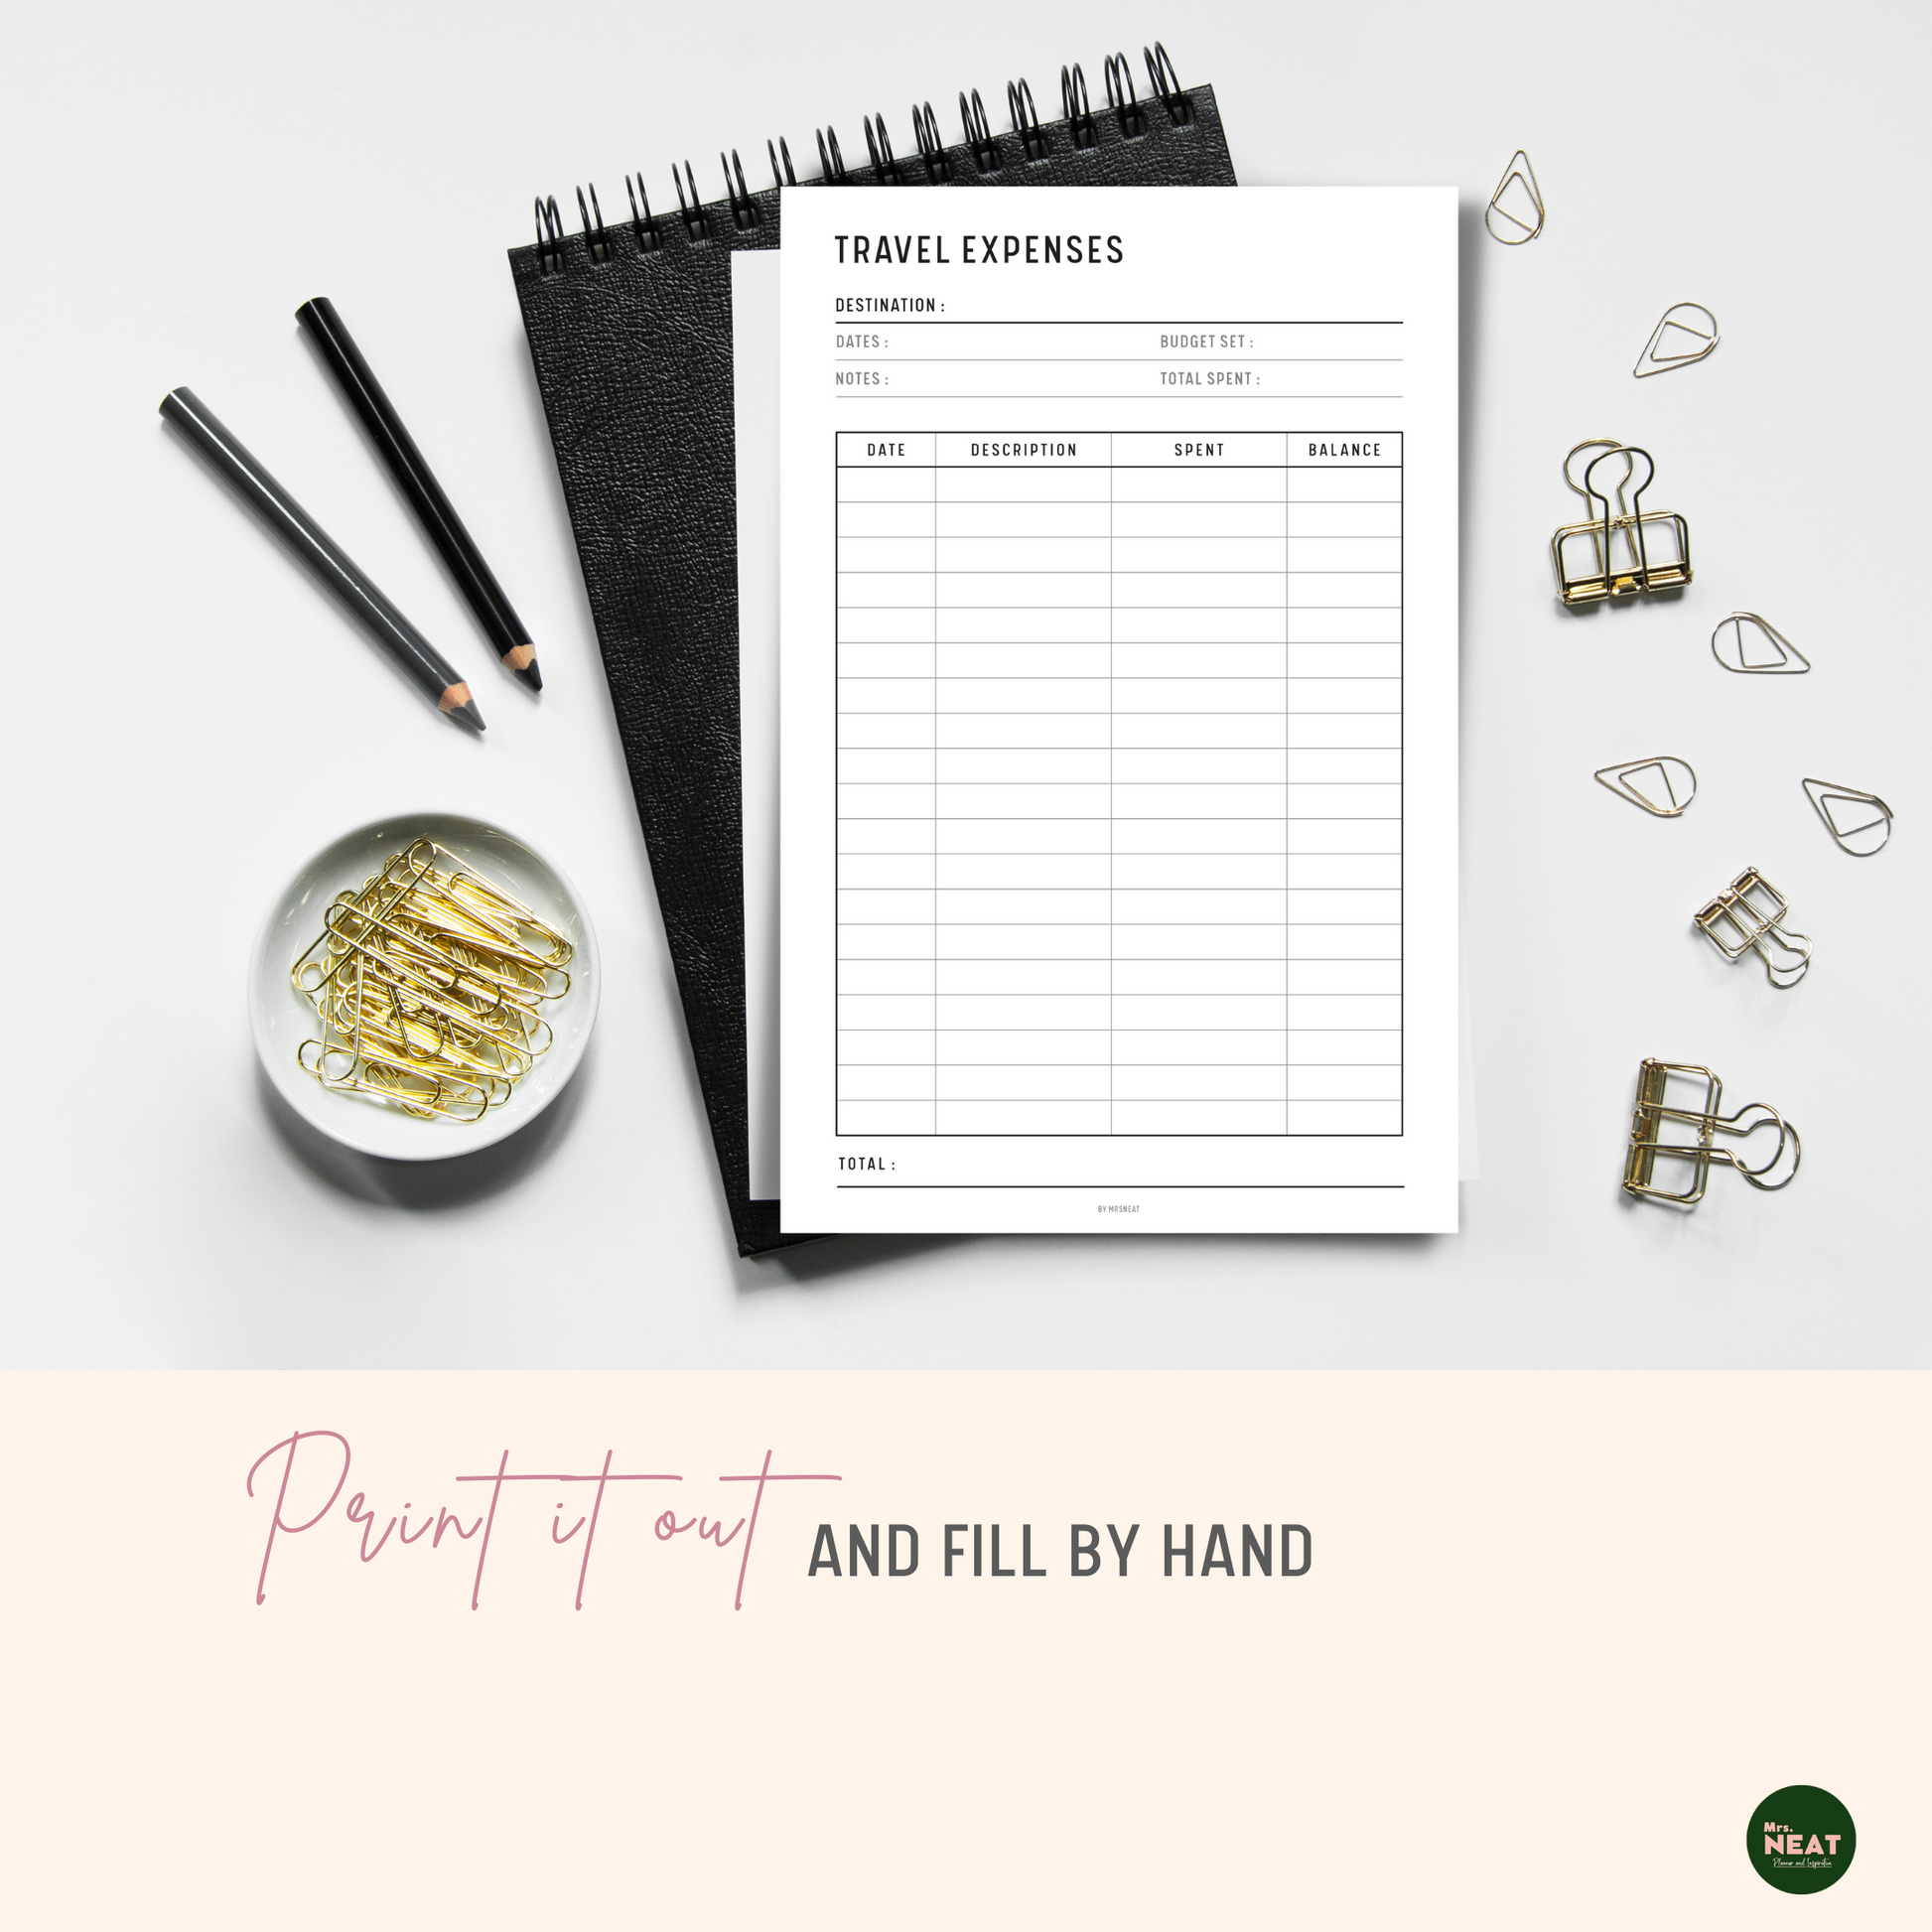 Travel Expenses Tracker Planner Printable printed out on the paper with stationery surround